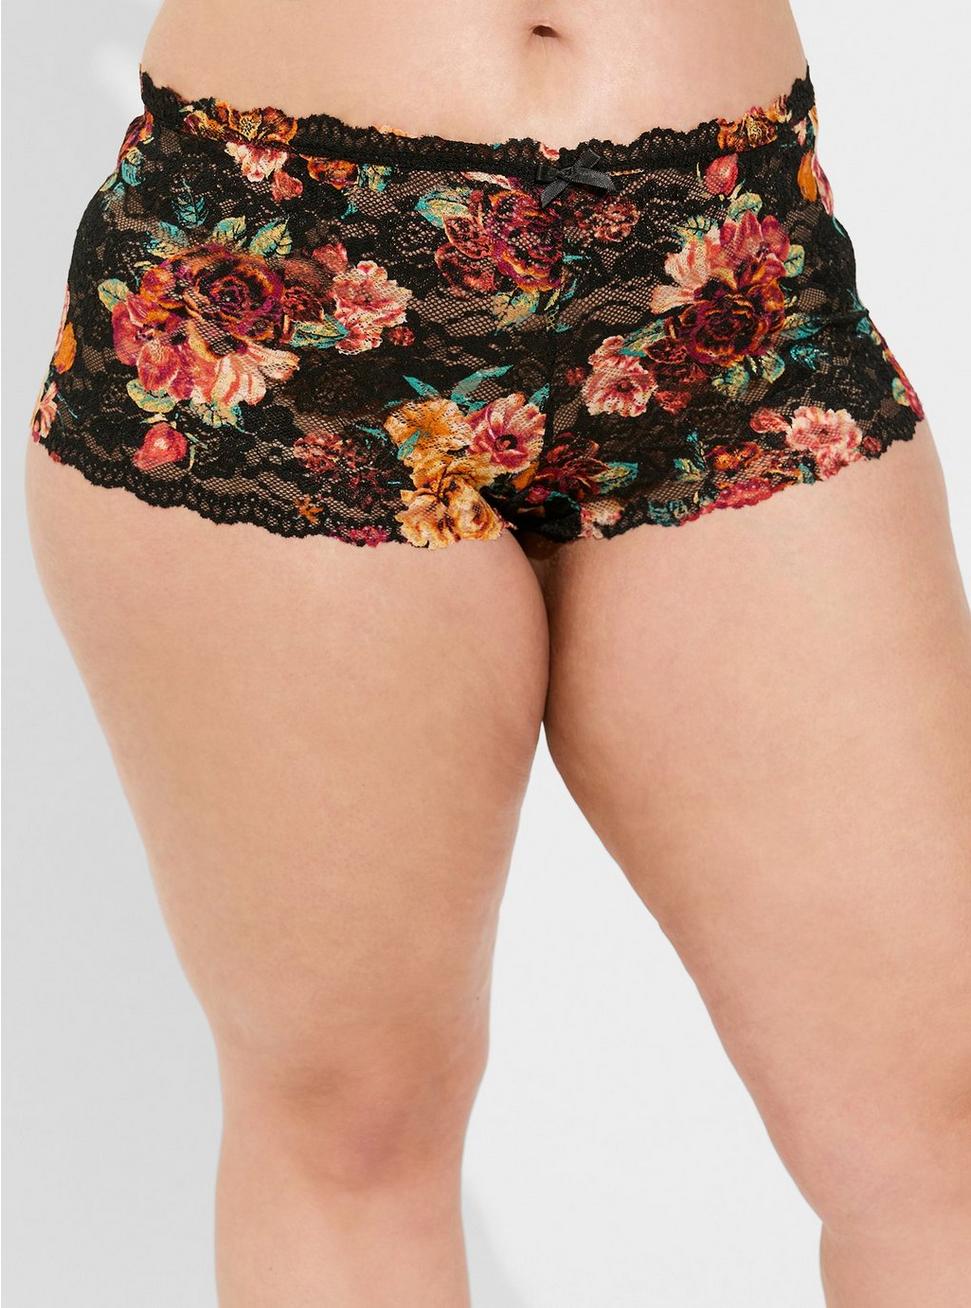 Simply Lace Mid-Rise Cheeky Panty, NON ANIMALISTIC FLORAL BLACK, alternate